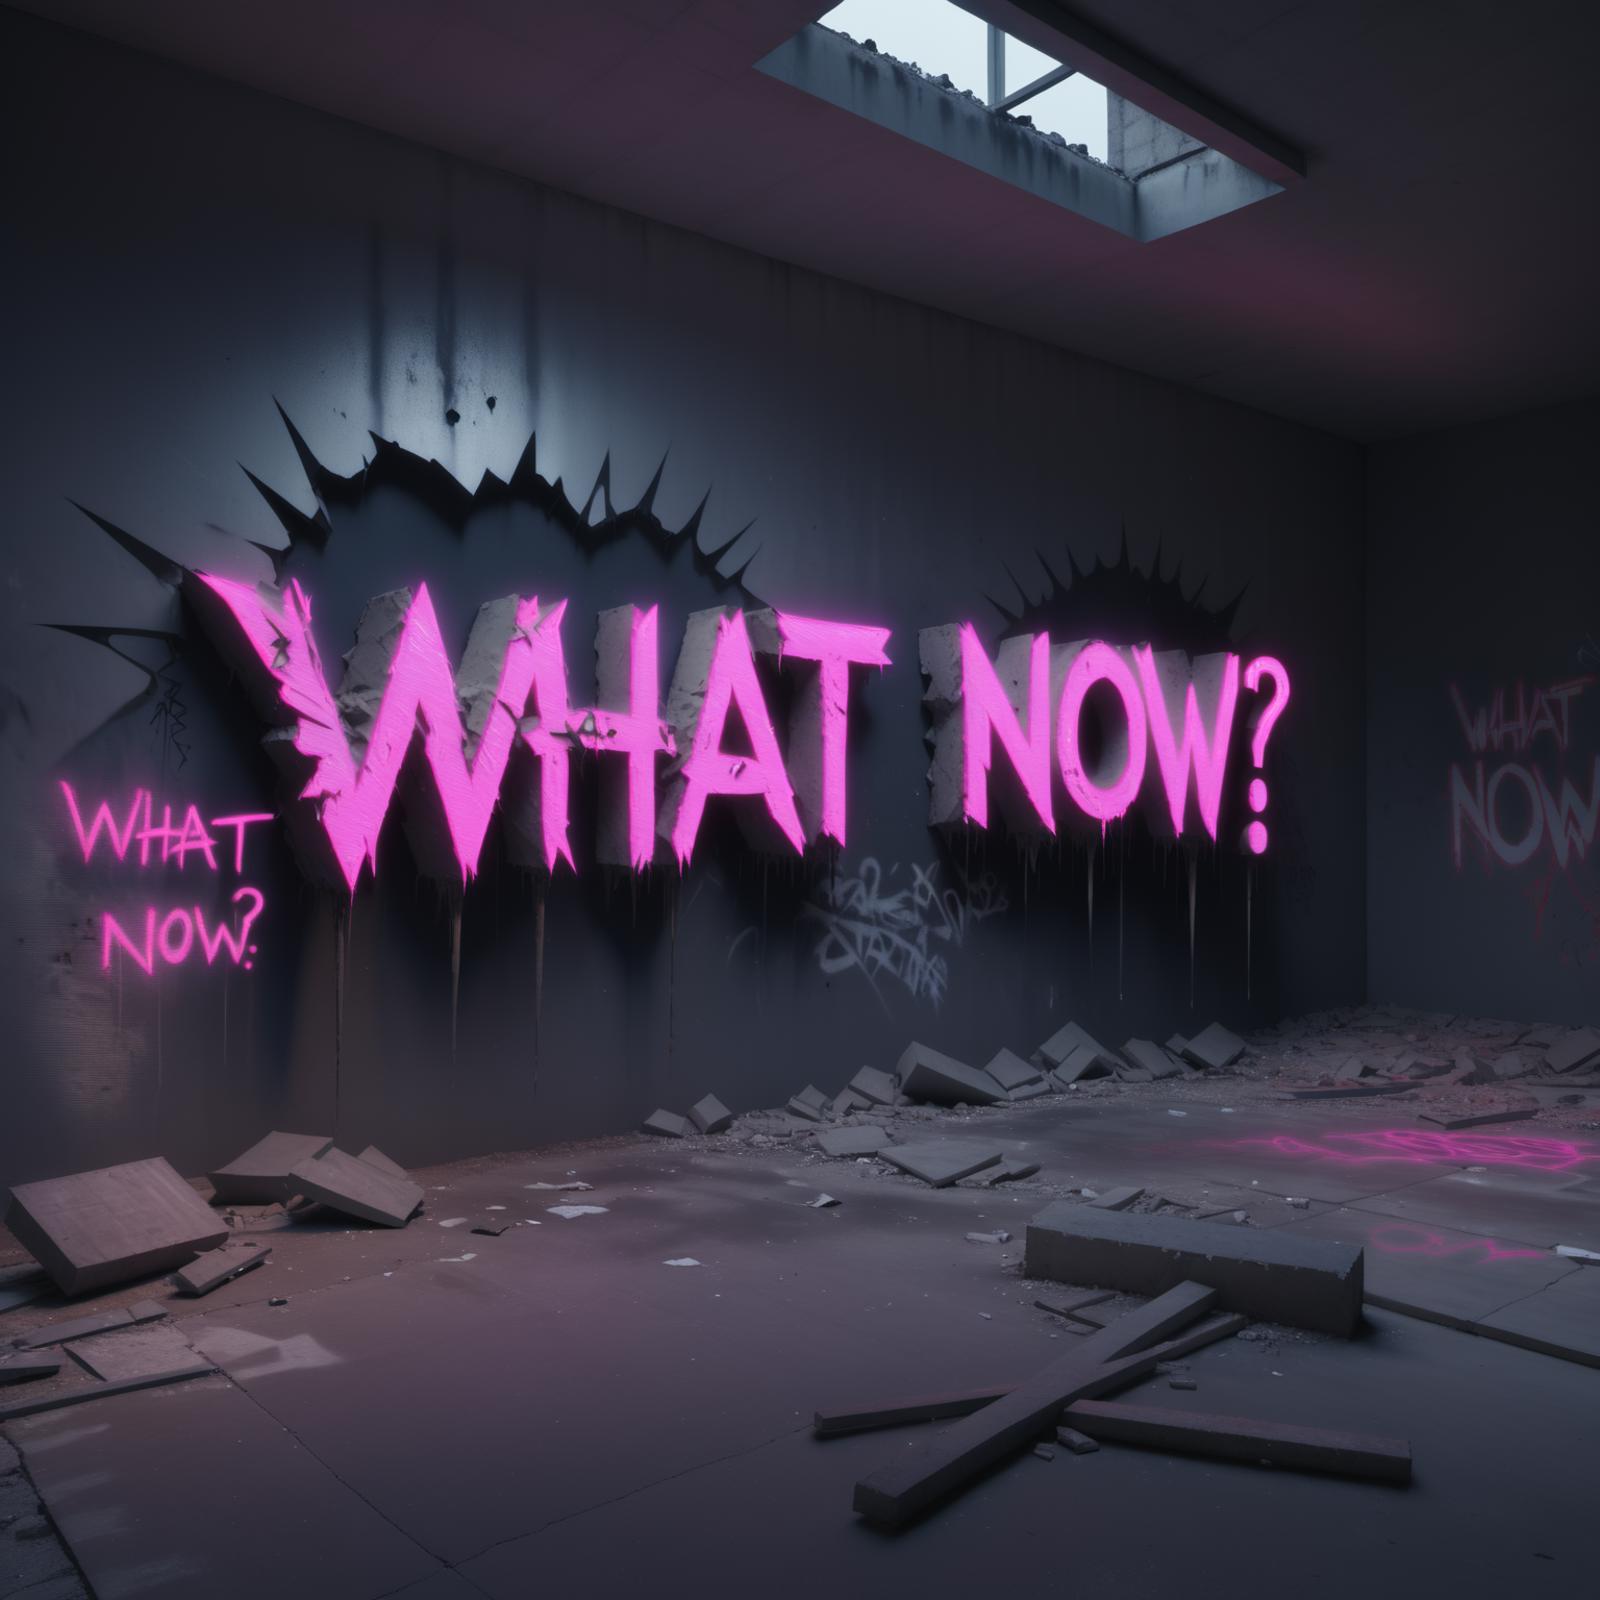 A room with a pink graffiti saying "What now?" on the wall.